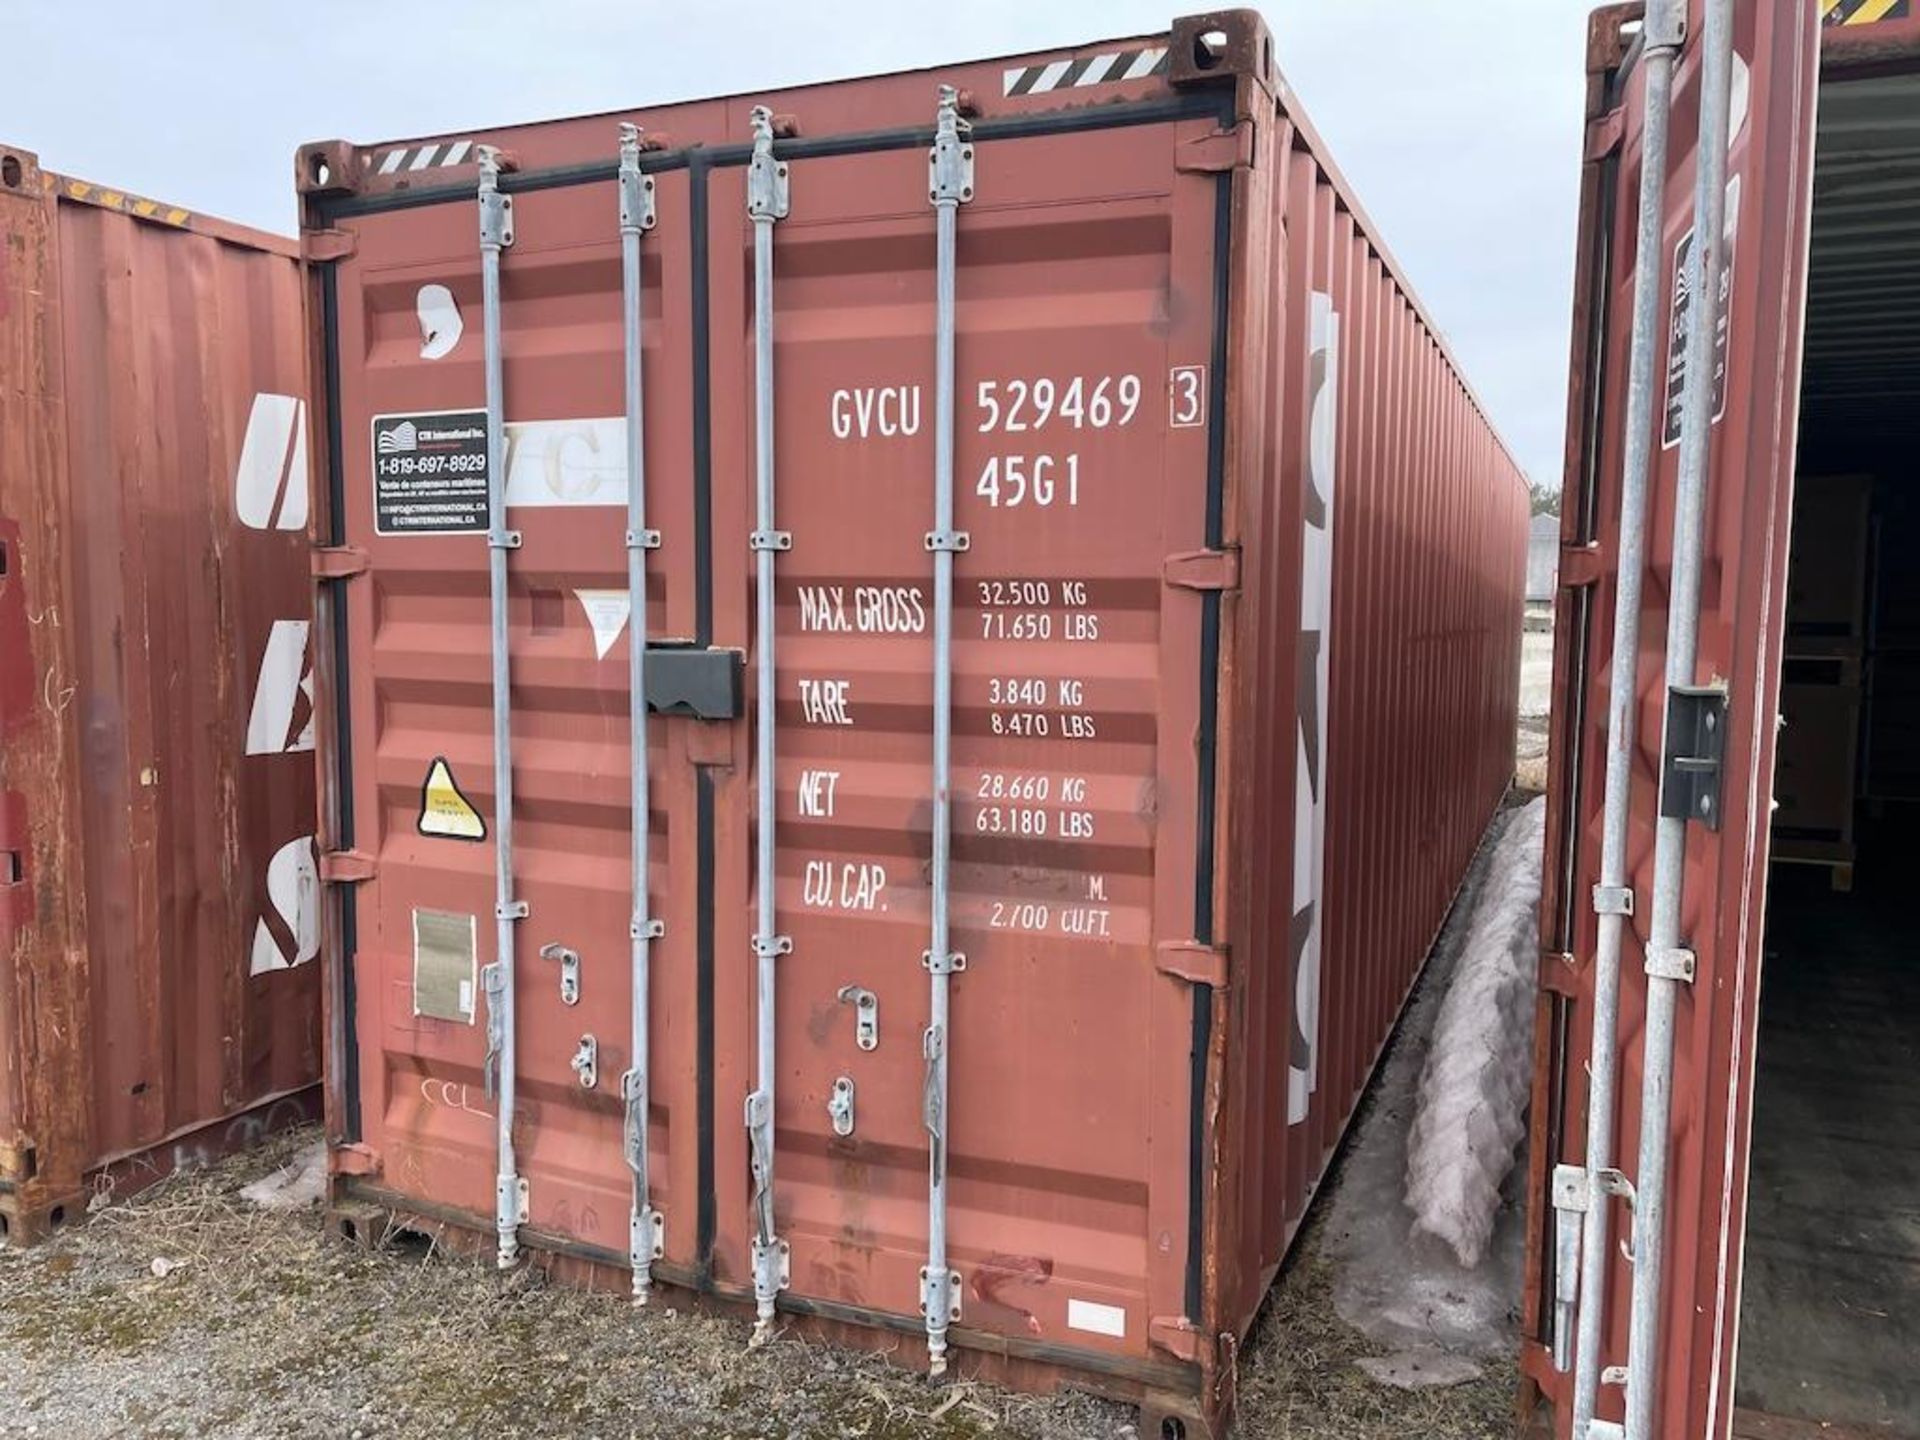 40 FT SEA CONTAINER, EXCLUDING CONTENTS, DELAYED PICK UP UNTIL MAY 13 [11] [TROIS RIVIERES] *PLEASE - Image 2 of 4